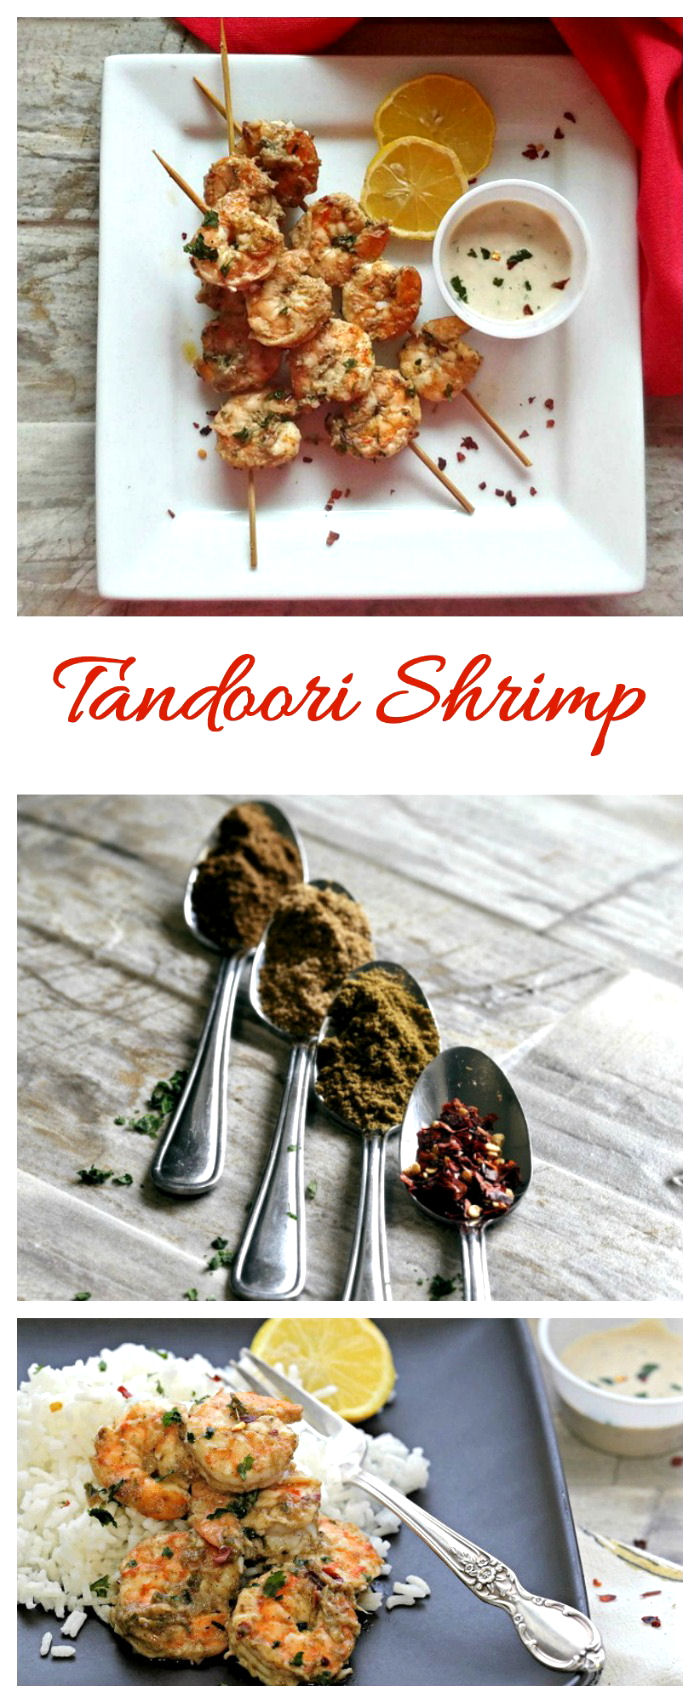 This Tandoori shrimp recipe is flavored with robust Indian spices and is ready in just 15 minutes